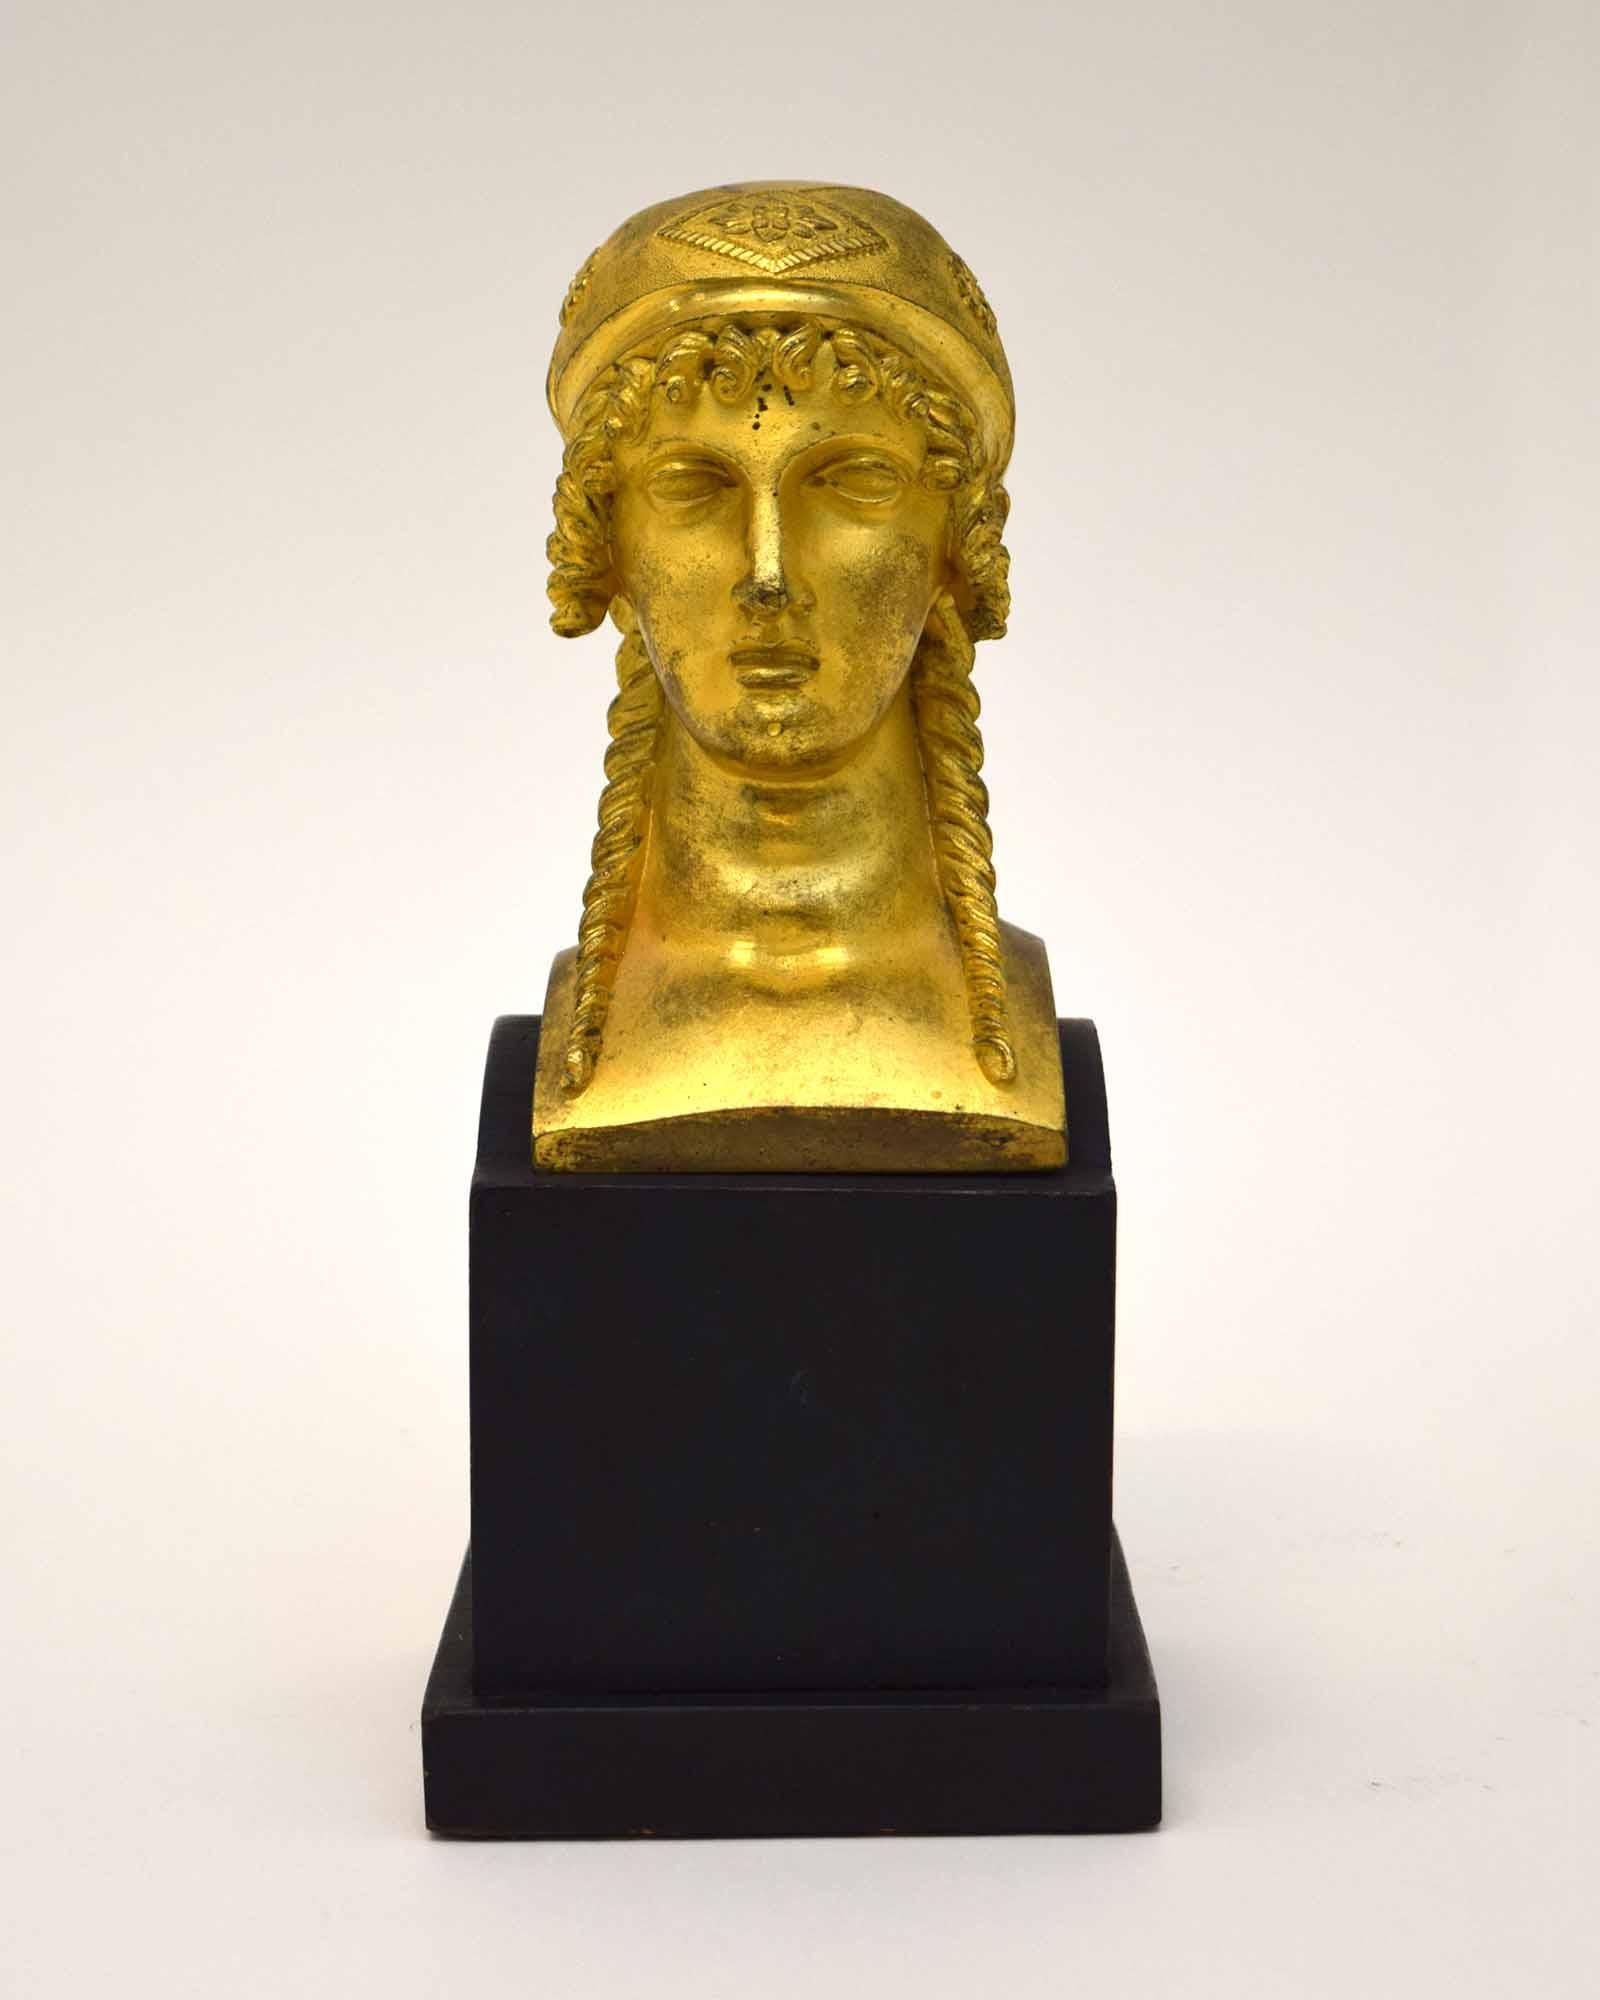 This Empire ormolu head of a woman was made as a furniture mount in France around 1810, and probably adorned a bed. In any case, closer to our own time, it was deemed worthy of mounting as a sculpture on a finely made base. Its neoclassical style,